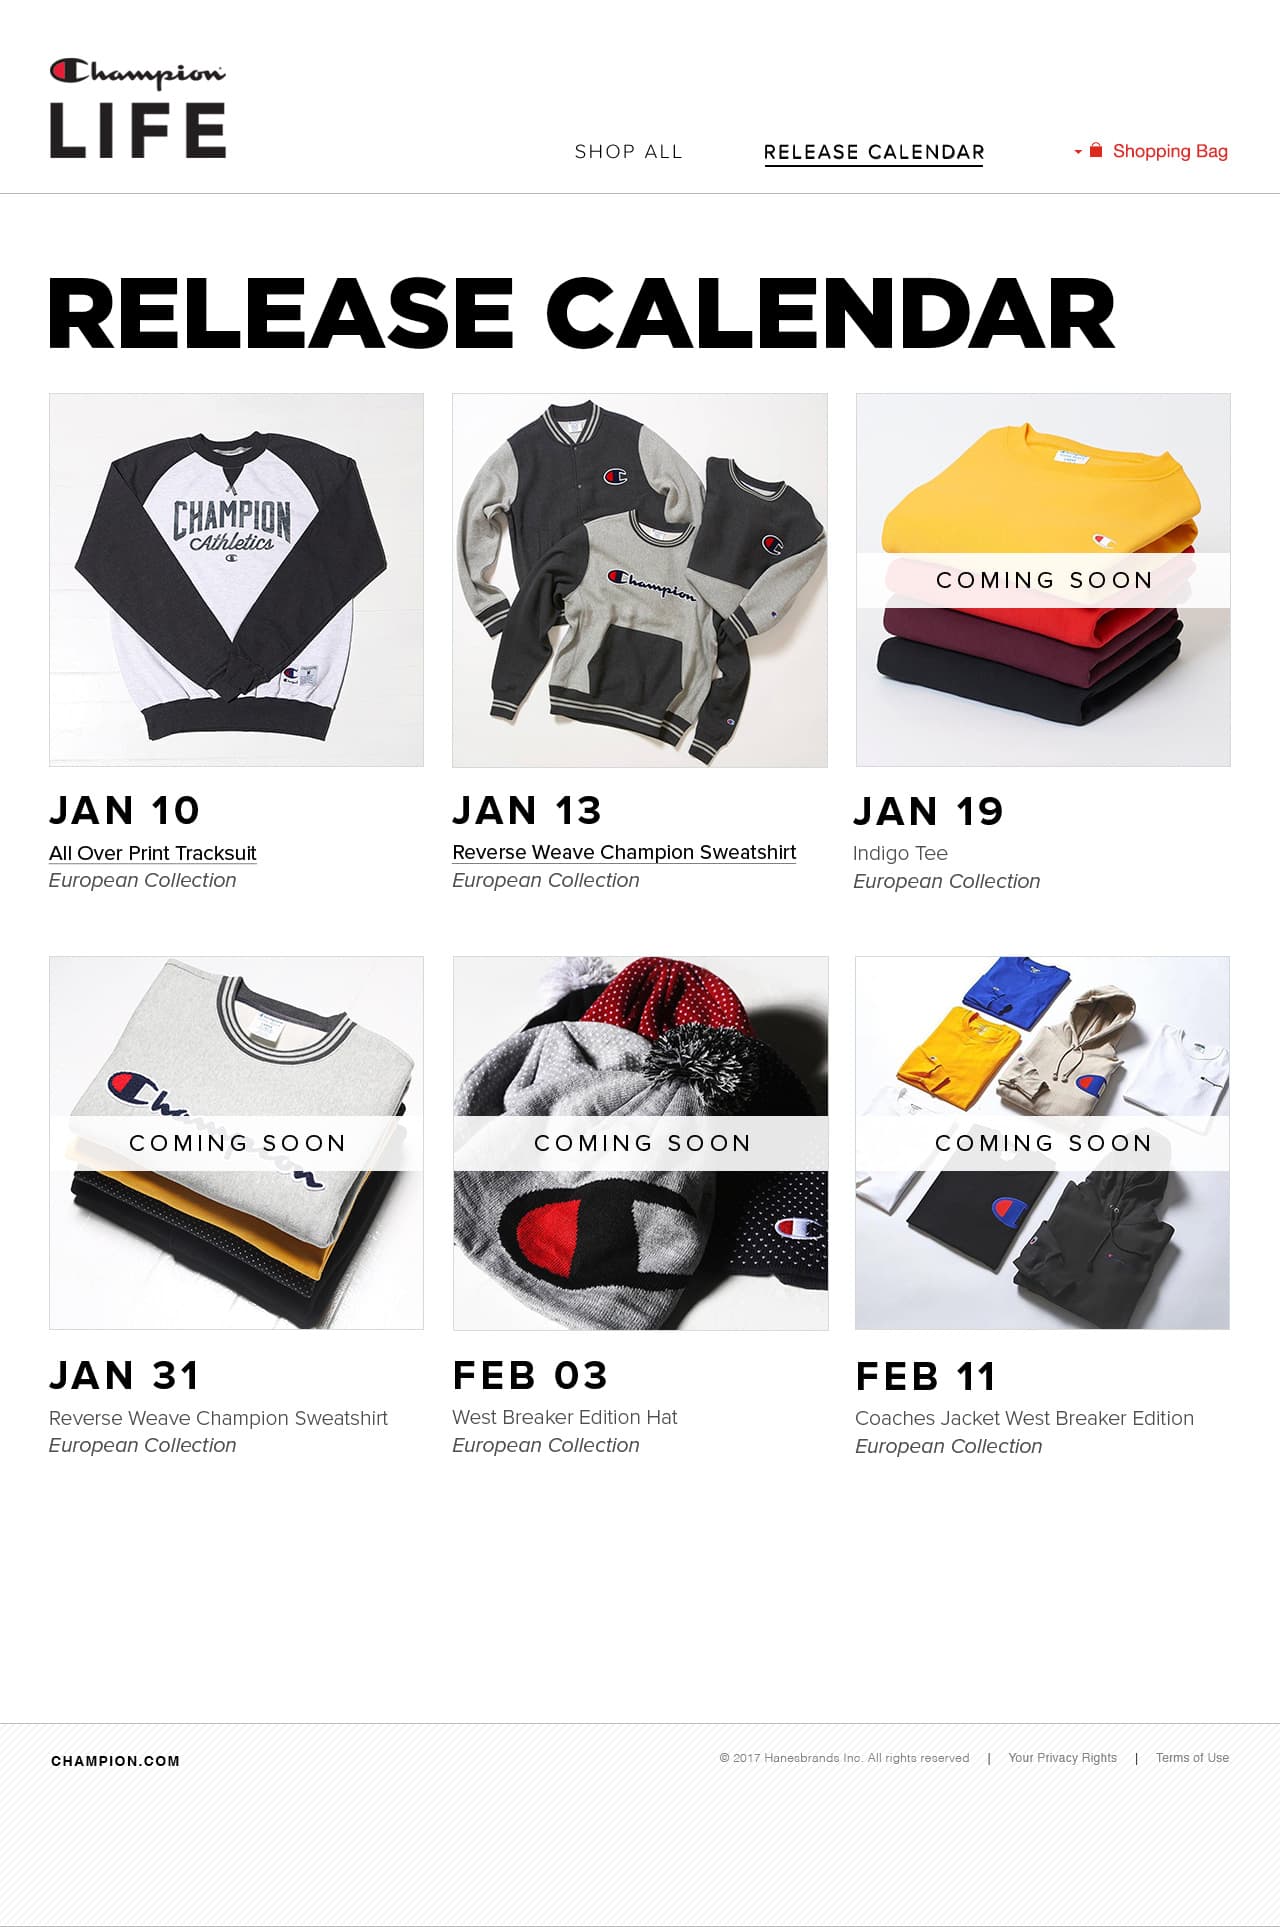 Champion LIFE - Release Calendar State